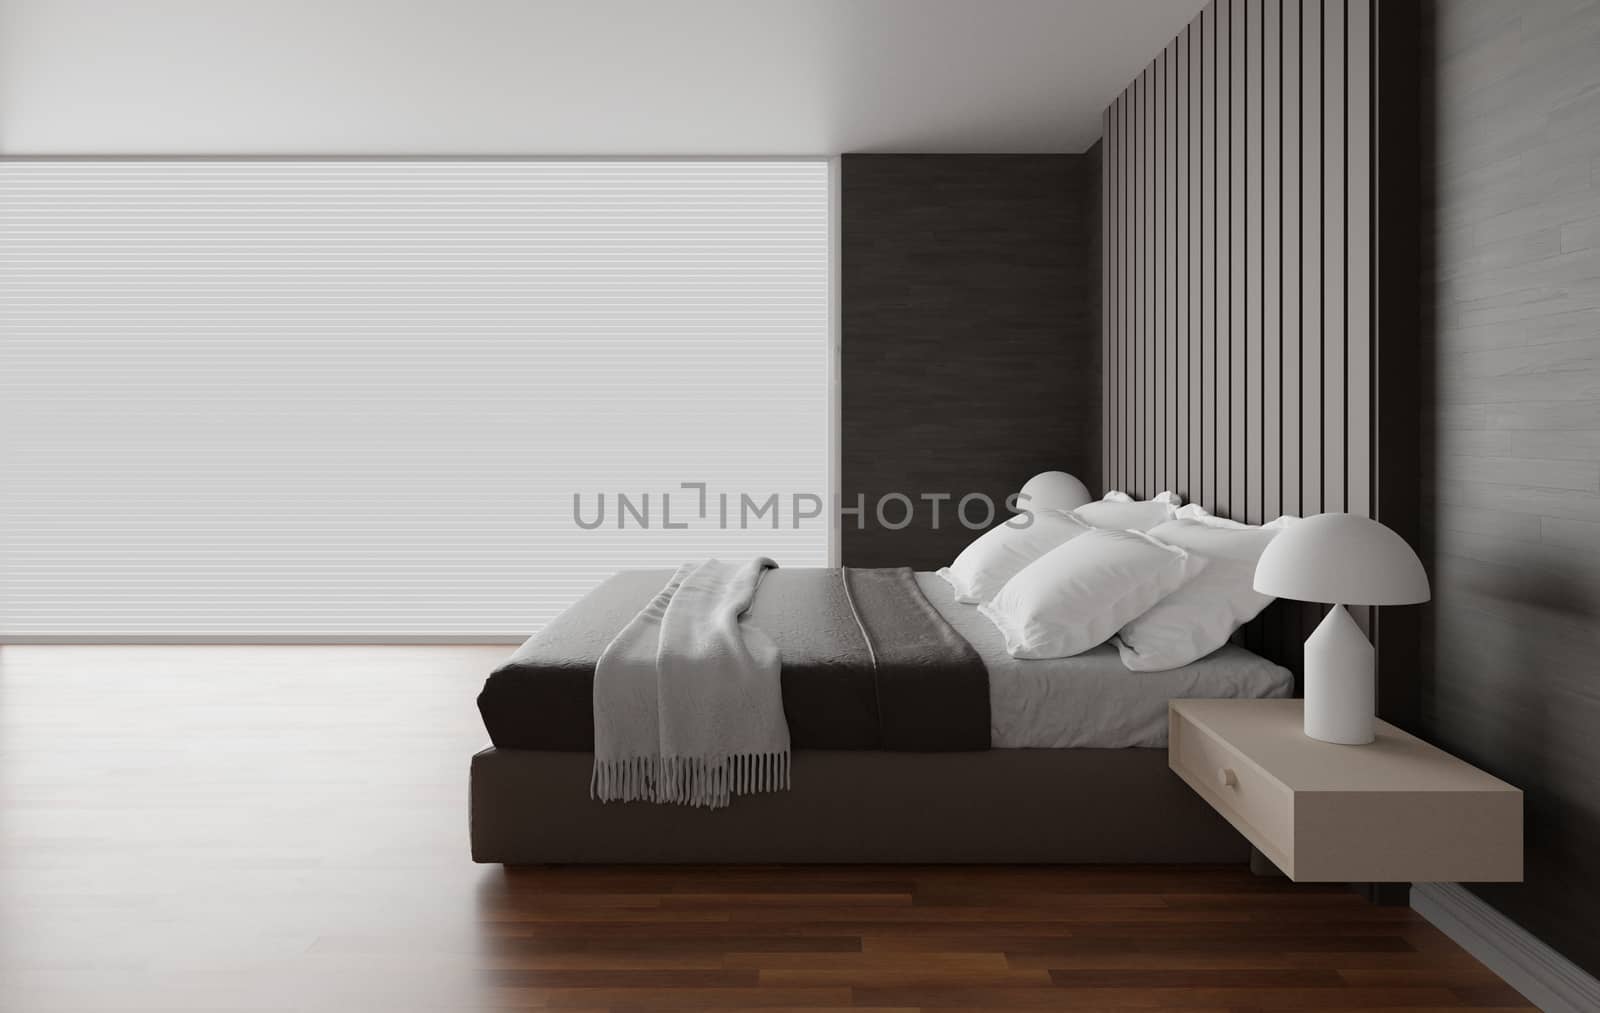 Bedroom interior design ,The room have bed and large window, minimalist and modern style, 3d render background